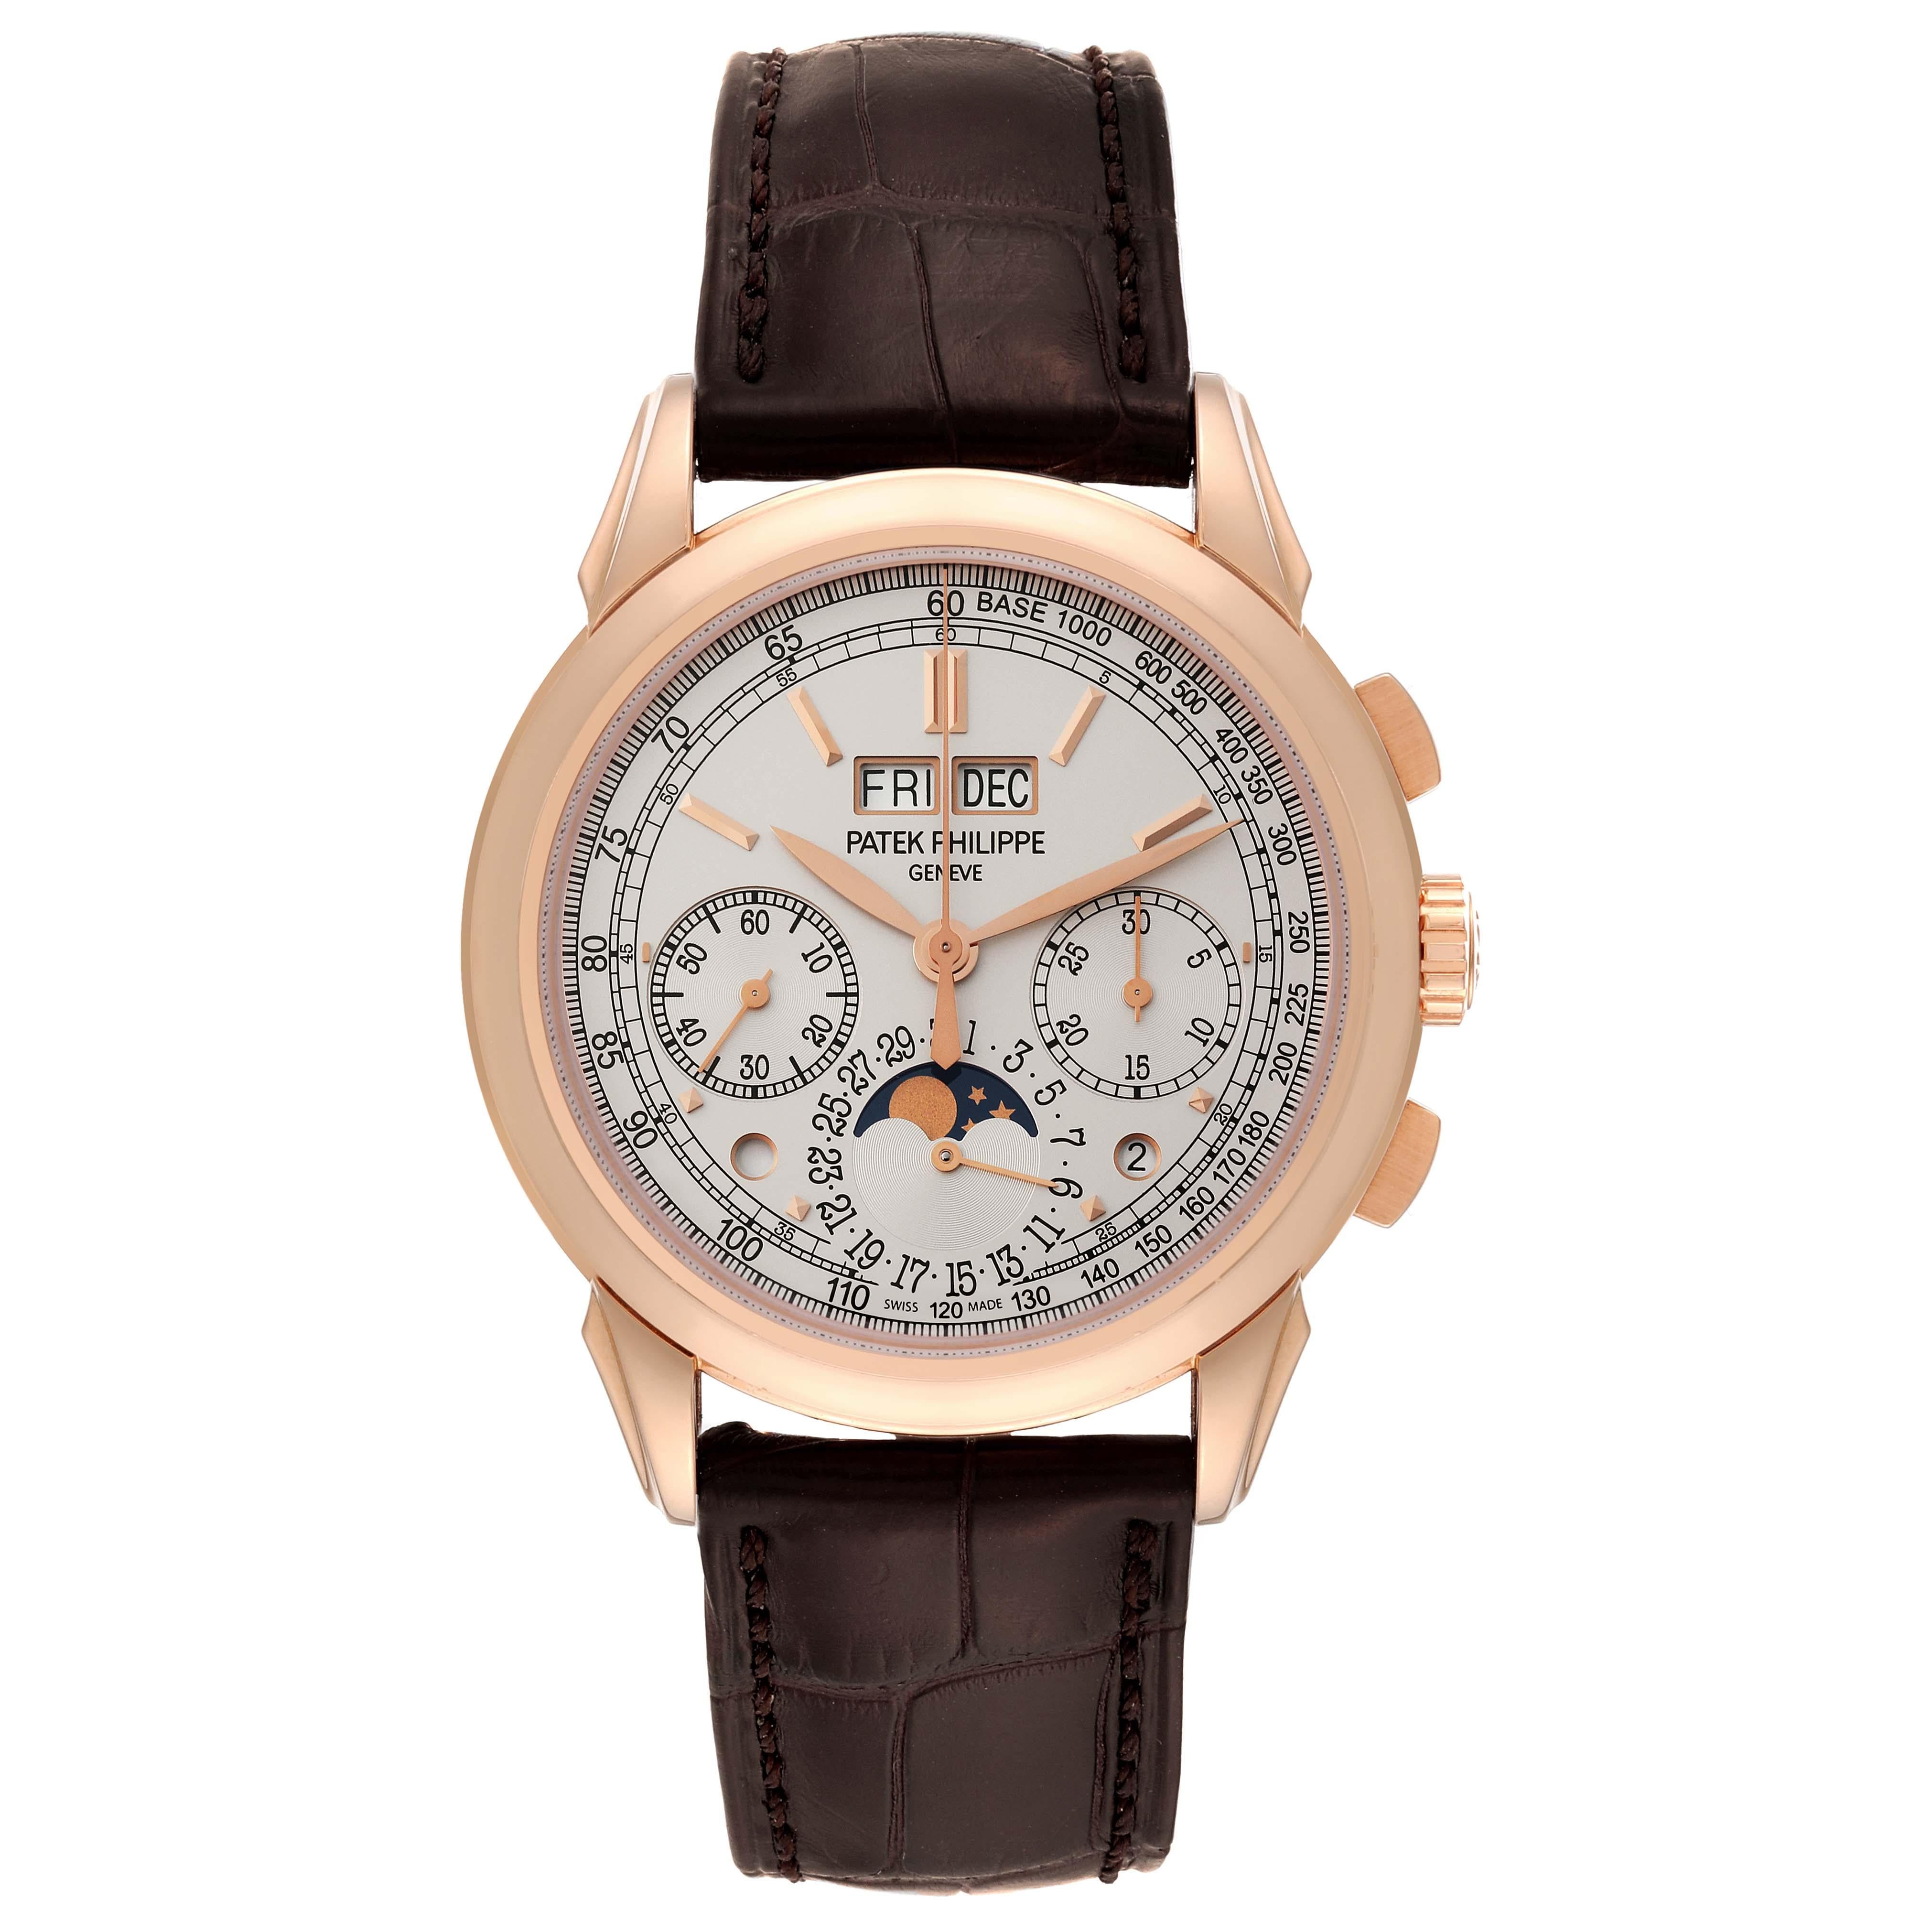 Patek Philippe Grand Complications Perpetual Calendar Rose Gold Watch 5270. Manual-winding movement. 18K rose gold case 41.0 mm in diameter. . Scratch resistant sapphire crystal. Silver dial with applied rose gold hour markers, leaf shaped hands,